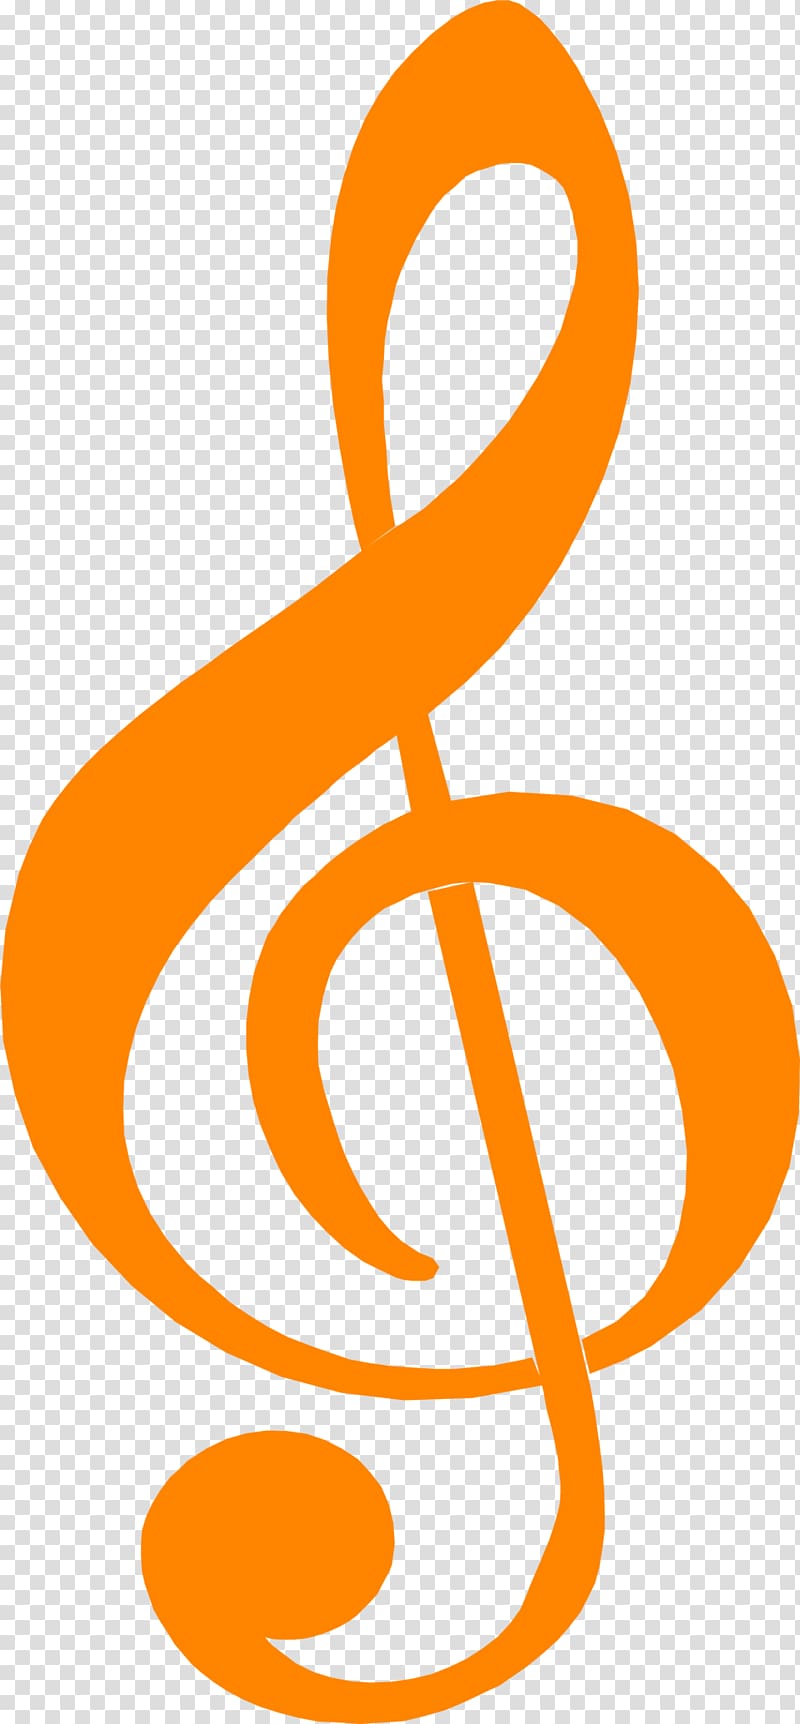 Musical note Musician Musical theatre Music school, Treble Clef transparent background PNG clipart